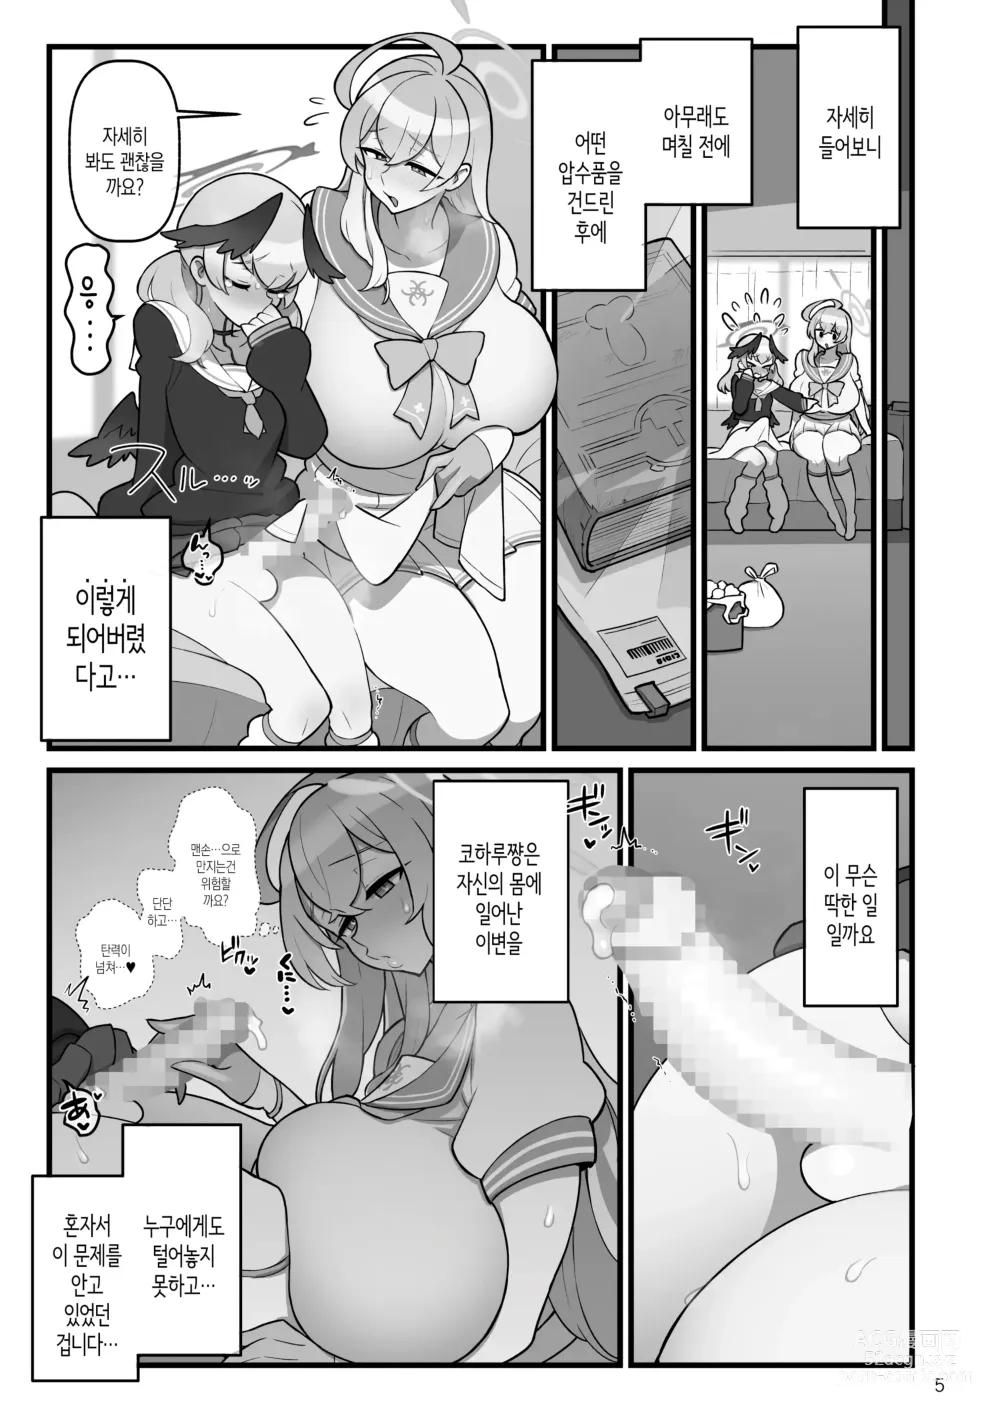 Page 6 of doujinshi 코하루 후타나루